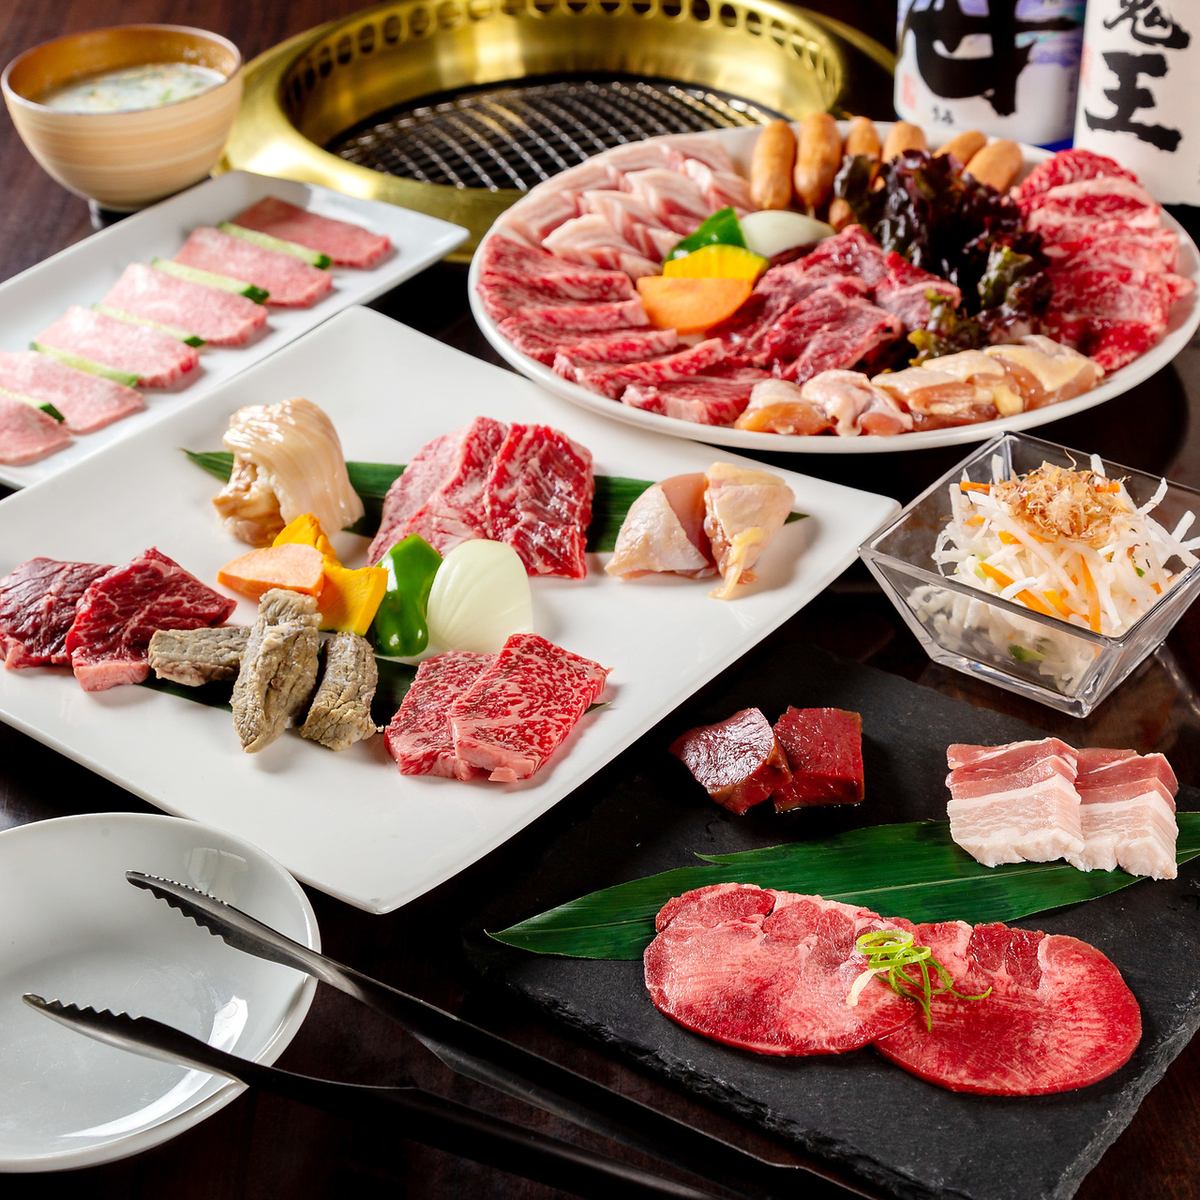 Complete with private rooms ◎ A community-based yakiniku restaurant that can be used for special occasions and everyday use